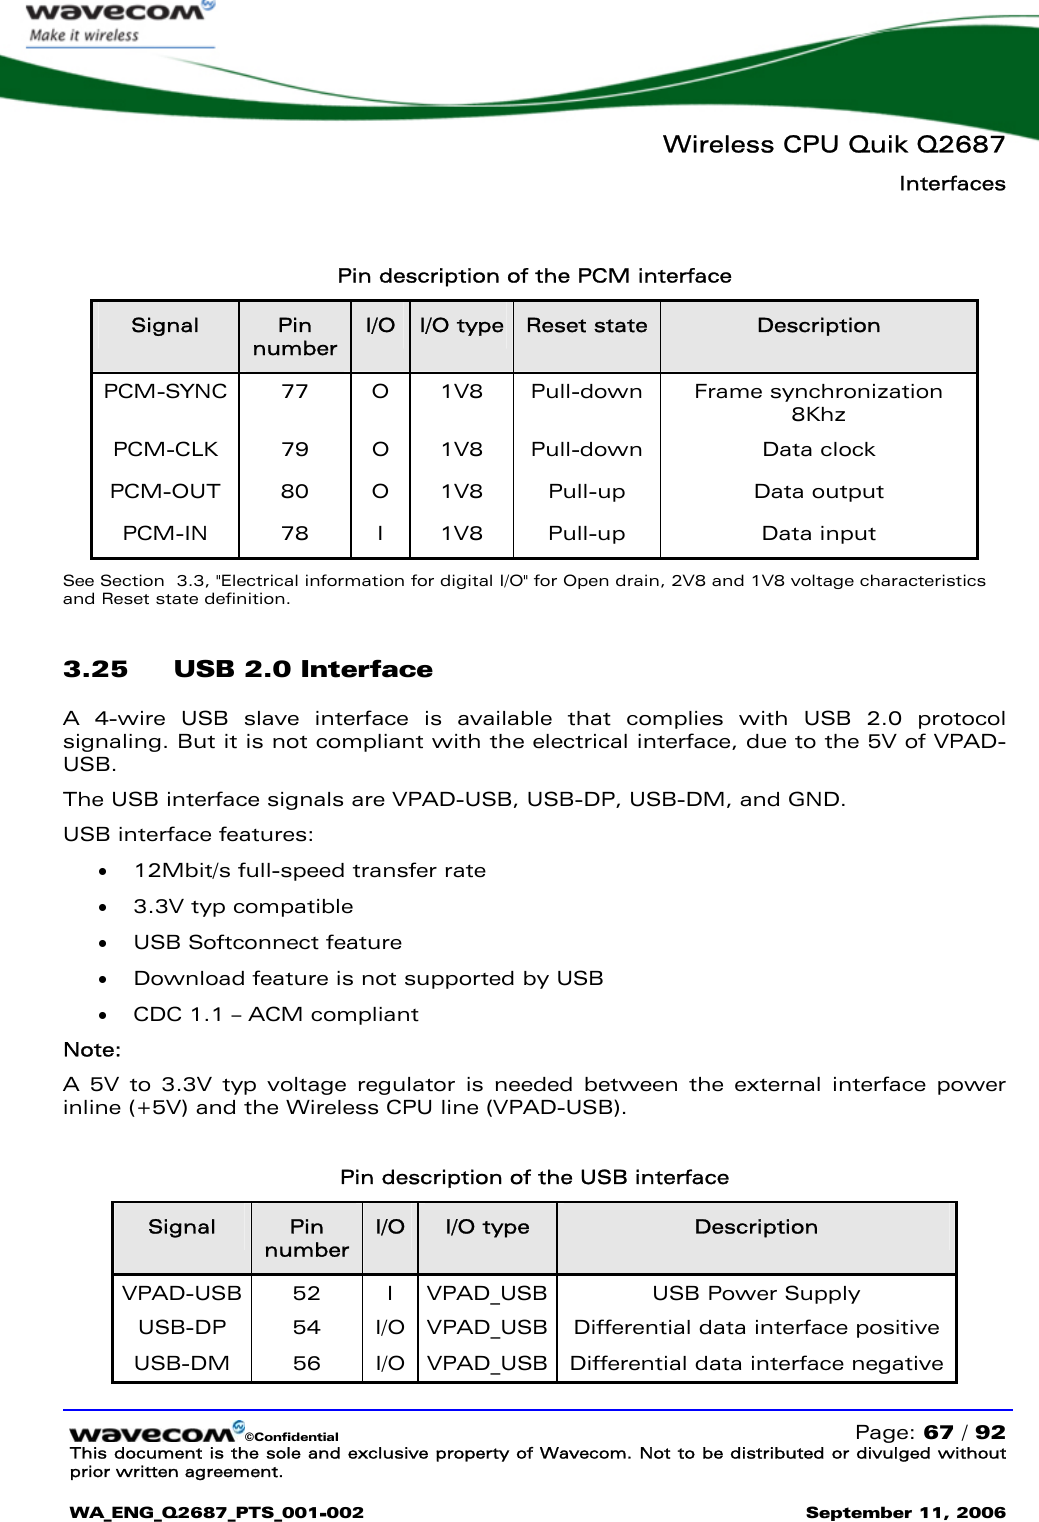   Wireless CPU Quik Q2687 Interfaces   ©Confidential   Page: 67 / 92 This document is the sole and exclusive property of Wavecom. Not to be distributed or divulged without prior written agreement.  WA_ENG_Q2687_PTS_001-002 September 11, 2006     Pin description of the PCM interface Signal  Pin number I/O  I/O type  Reset state  Description PCM-SYNC 77  O 1V8 Pull-down Frame synchronization 8Khz PCM-CLK 79 O 1V8 Pull-down  Data clock PCM-OUT 80  O 1V8  Pull-up  Data output PCM-IN 78 I 1V8 Pull-up  Data input See Section  3.3, &quot;Electrical information for digital I/O&quot; for Open drain, 2V8 and 1V8 voltage characteristics and Reset state definition. 3.25 USB 2.0 Interface A 4-wire USB slave interface is available that complies with USB 2.0 protocol signaling. But it is not compliant with the electrical interface, due to the 5V of VPAD-USB.  The USB interface signals are VPAD-USB, USB-DP, USB-DM, and GND. USB interface features: • 12Mbit/s full-speed transfer rate • 3.3V typ compatible • USB Softconnect feature • Download feature is not supported by USB • CDC 1.1 – ACM compliant  Note: A 5V to 3.3V typ voltage regulator is needed between the external interface power inline (+5V) and the Wireless CPU line (VPAD-USB).  Pin description of the USB interface Signal  Pin number I/O  I/O type  Description VPAD-USB  52  I  VPAD_USB  USB Power Supply  USB-DP 54 I/O VPAD_USB Differential data interface positive USB-DM 56 I/O VPAD_USB Differential data interface negative 